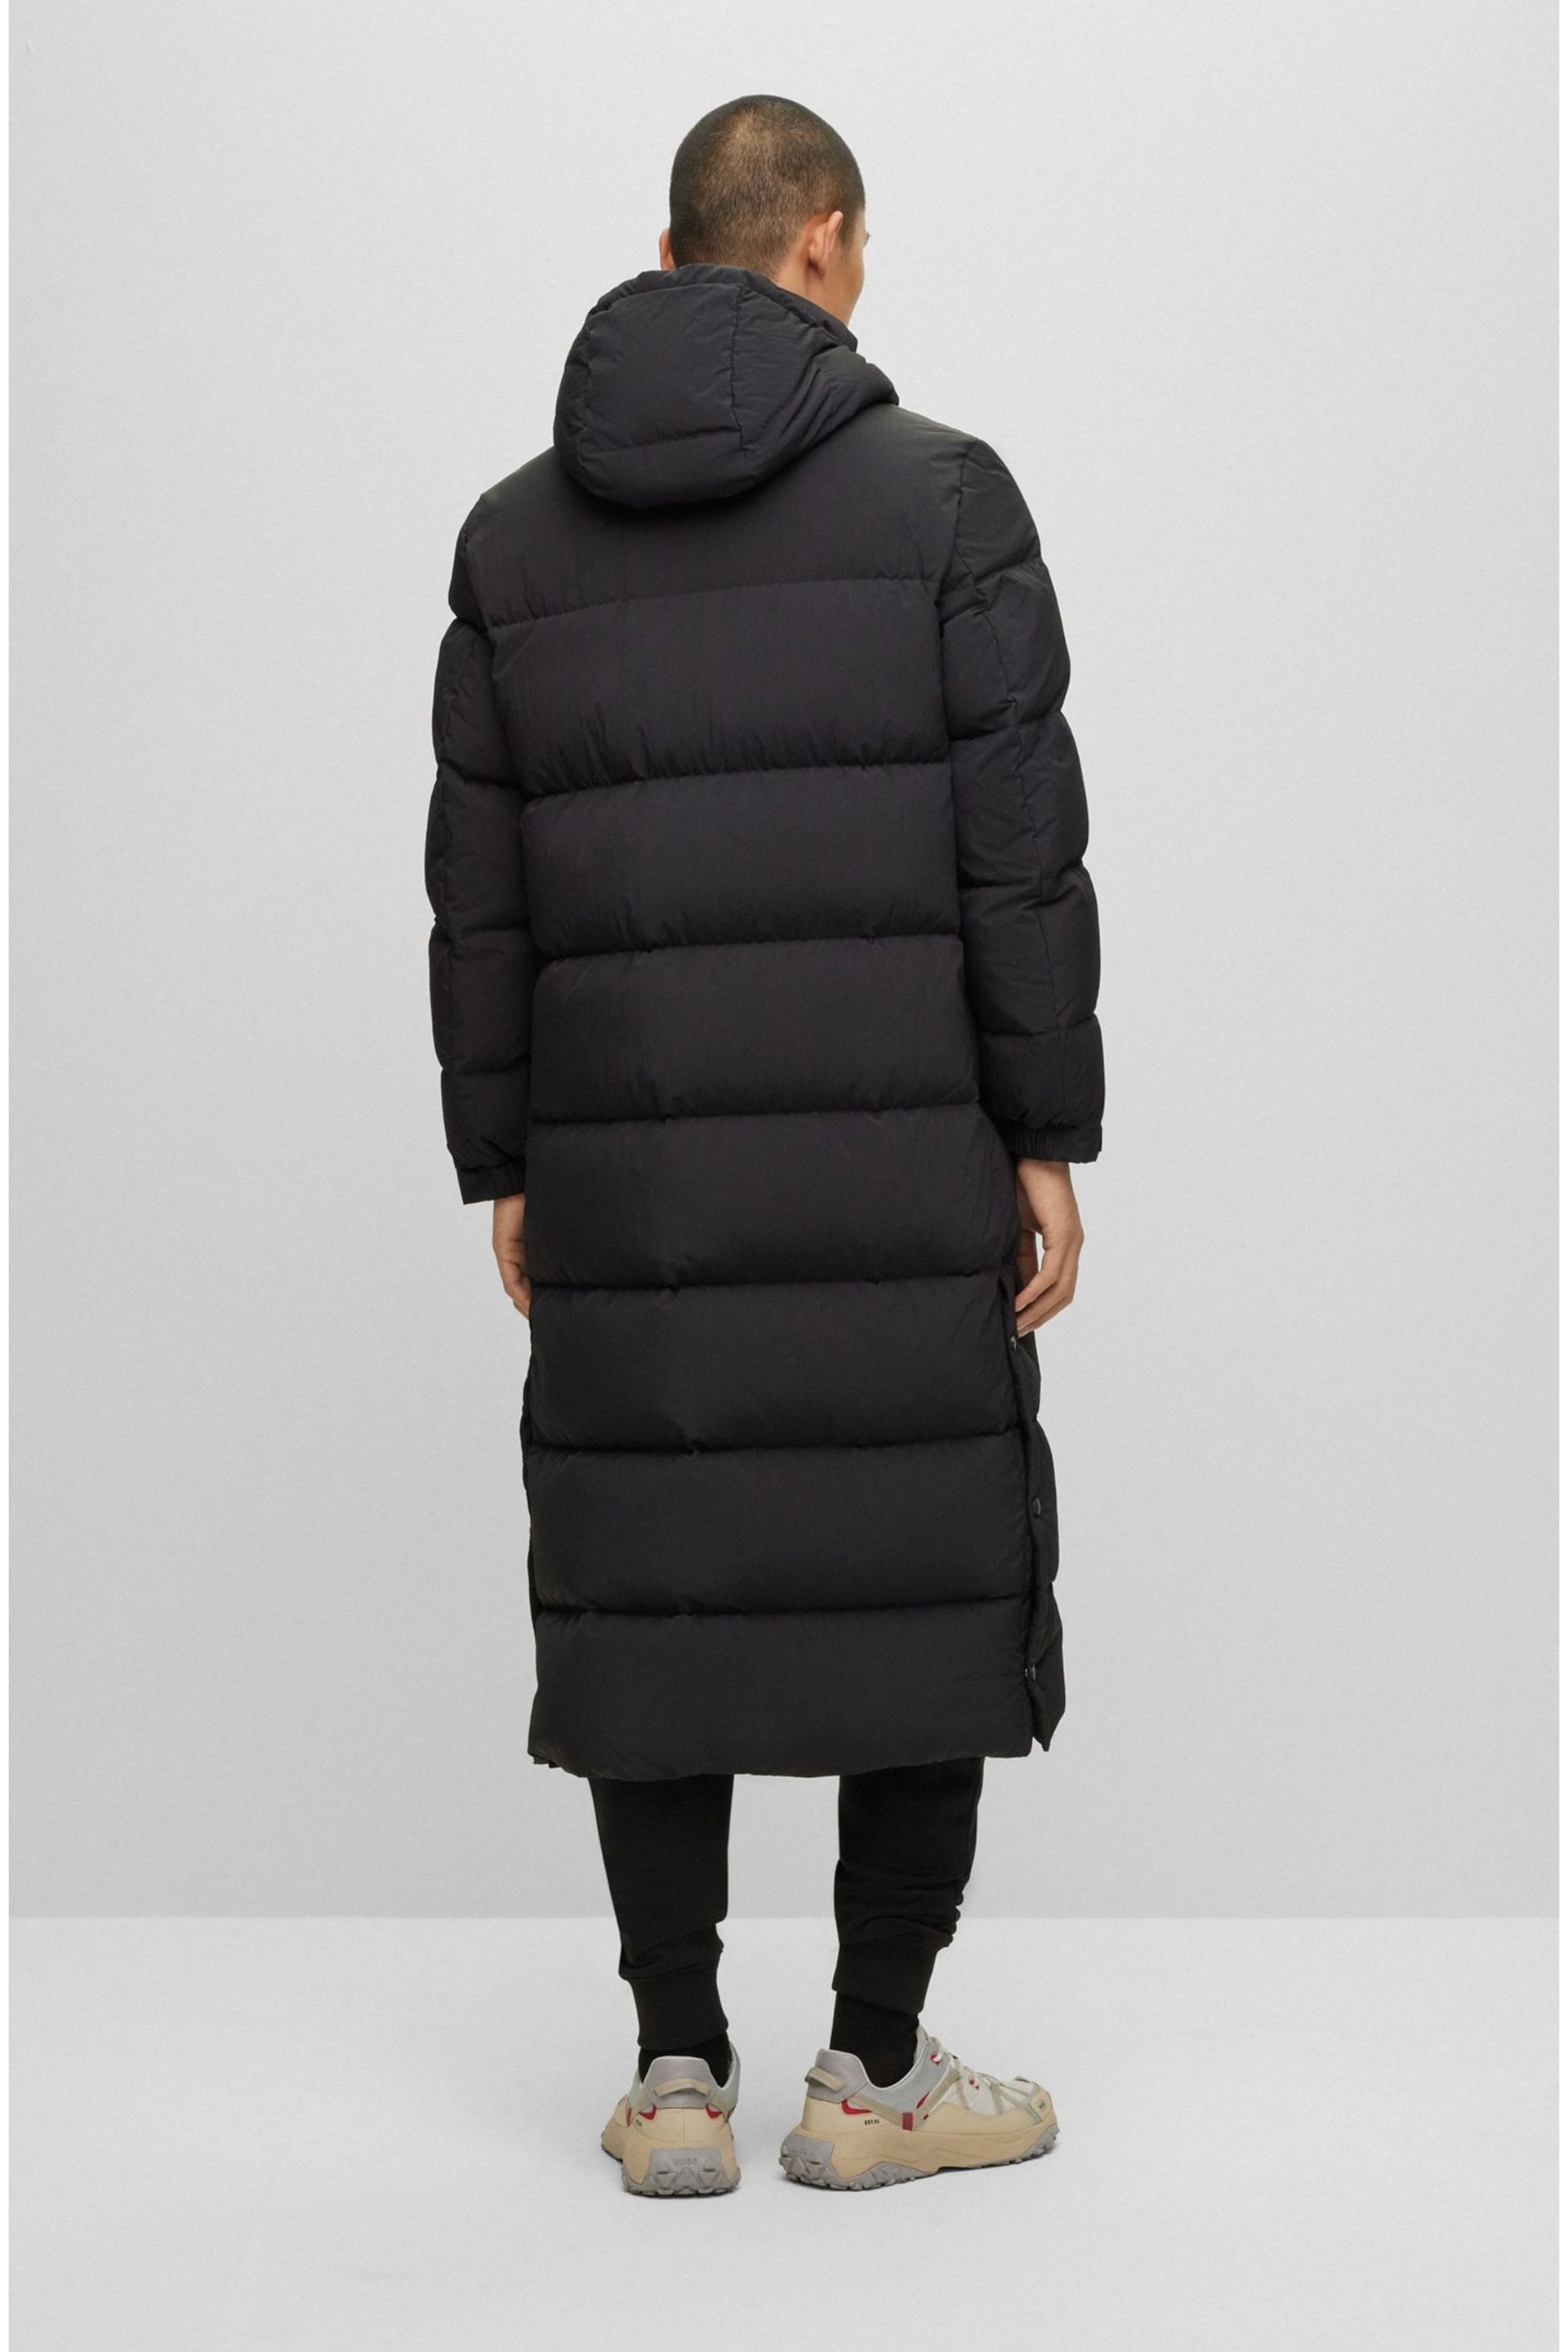 HUGO Mikky Long Down Puffer Jacket - Image 2 of 7